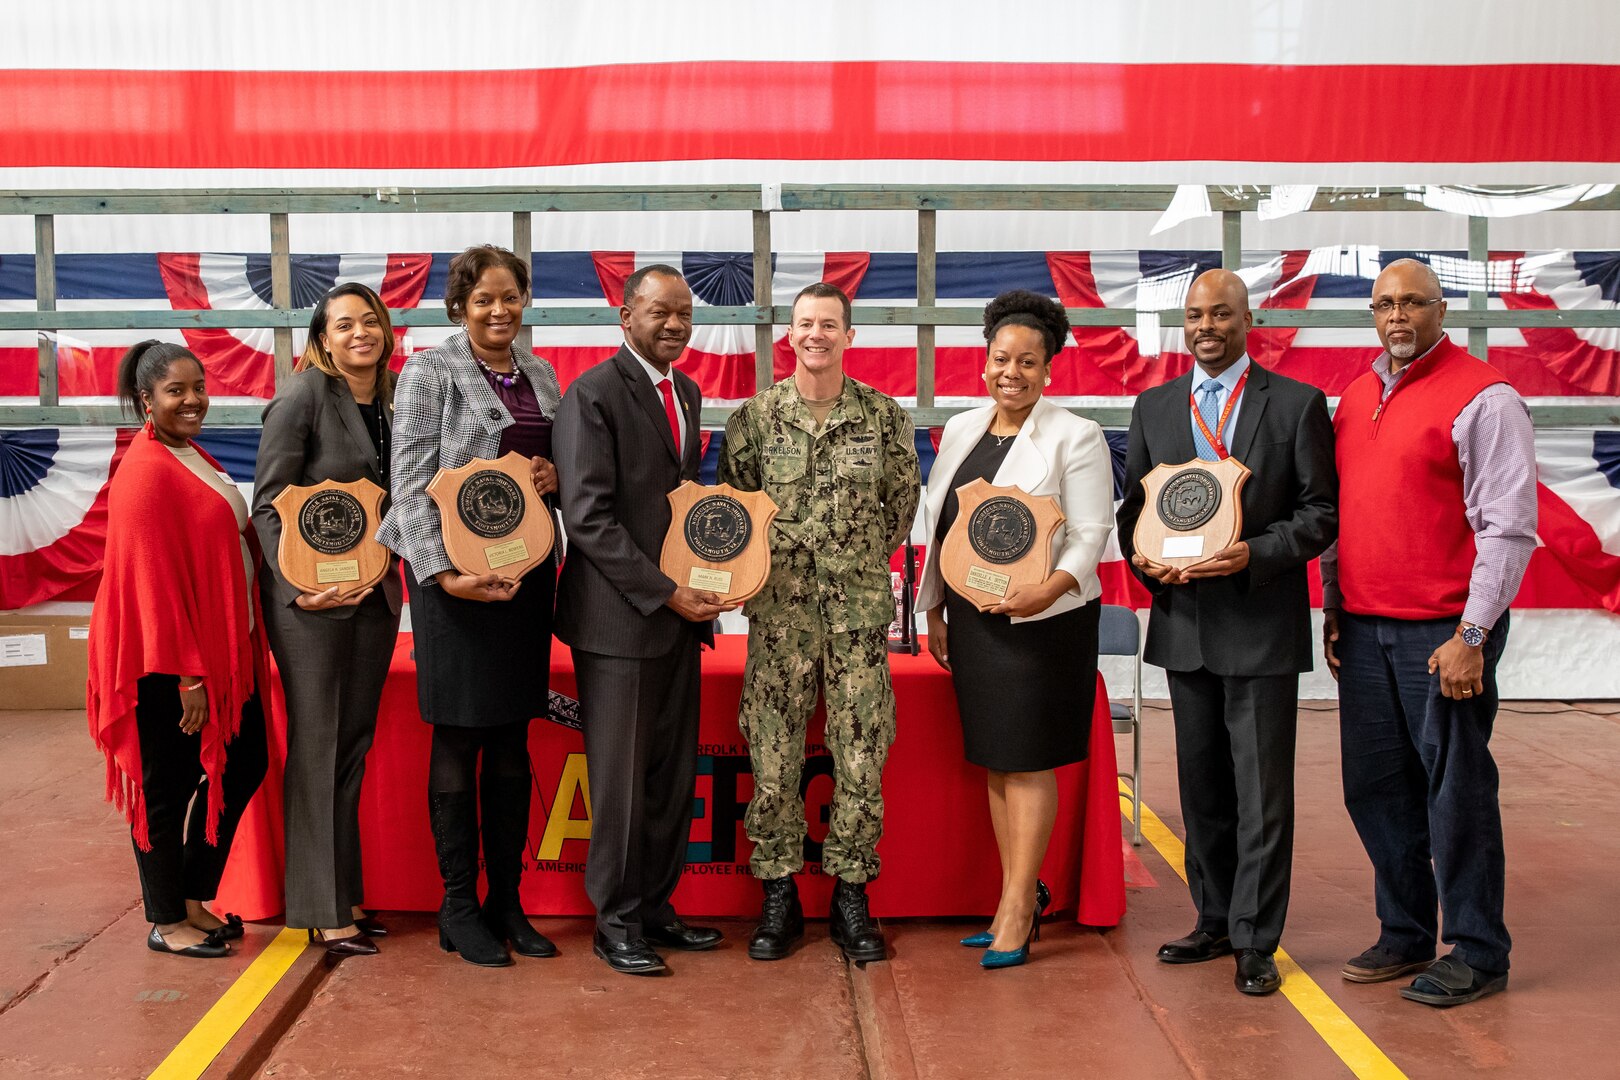 The panelists were awarded a Certificate of Appreciation from the African American Employee Resource Group (AA-ERG) and a shipyard plaque. Pictured are the panelists with Capt. Kai. Torkelson with Co-chairs Ciara Mason (far left) and Michael Taylor (far right).